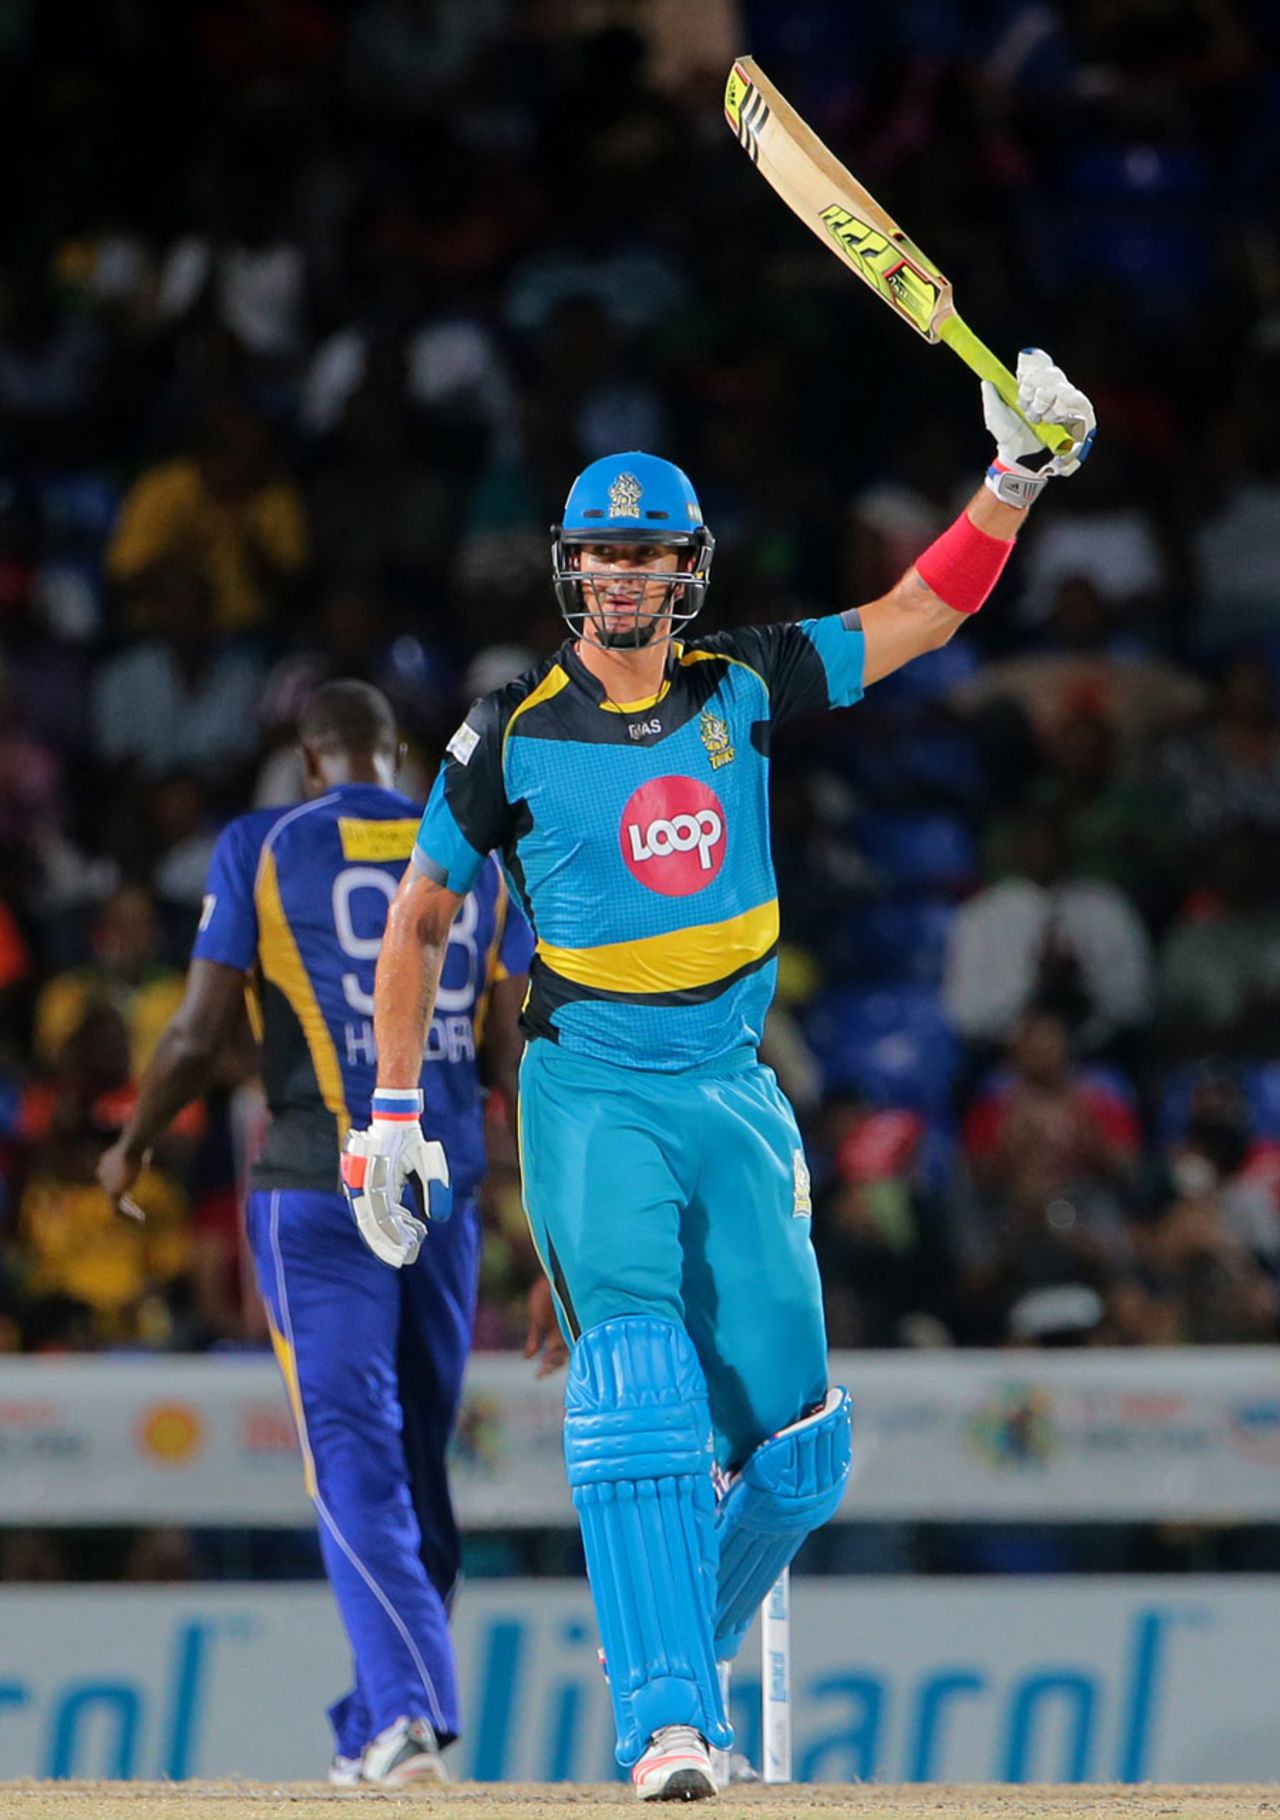 Kevin Pietersen hit a 39-ball 73, Barbados Tridents v St Lucia Zouks, Basseterre, July 3, 2015